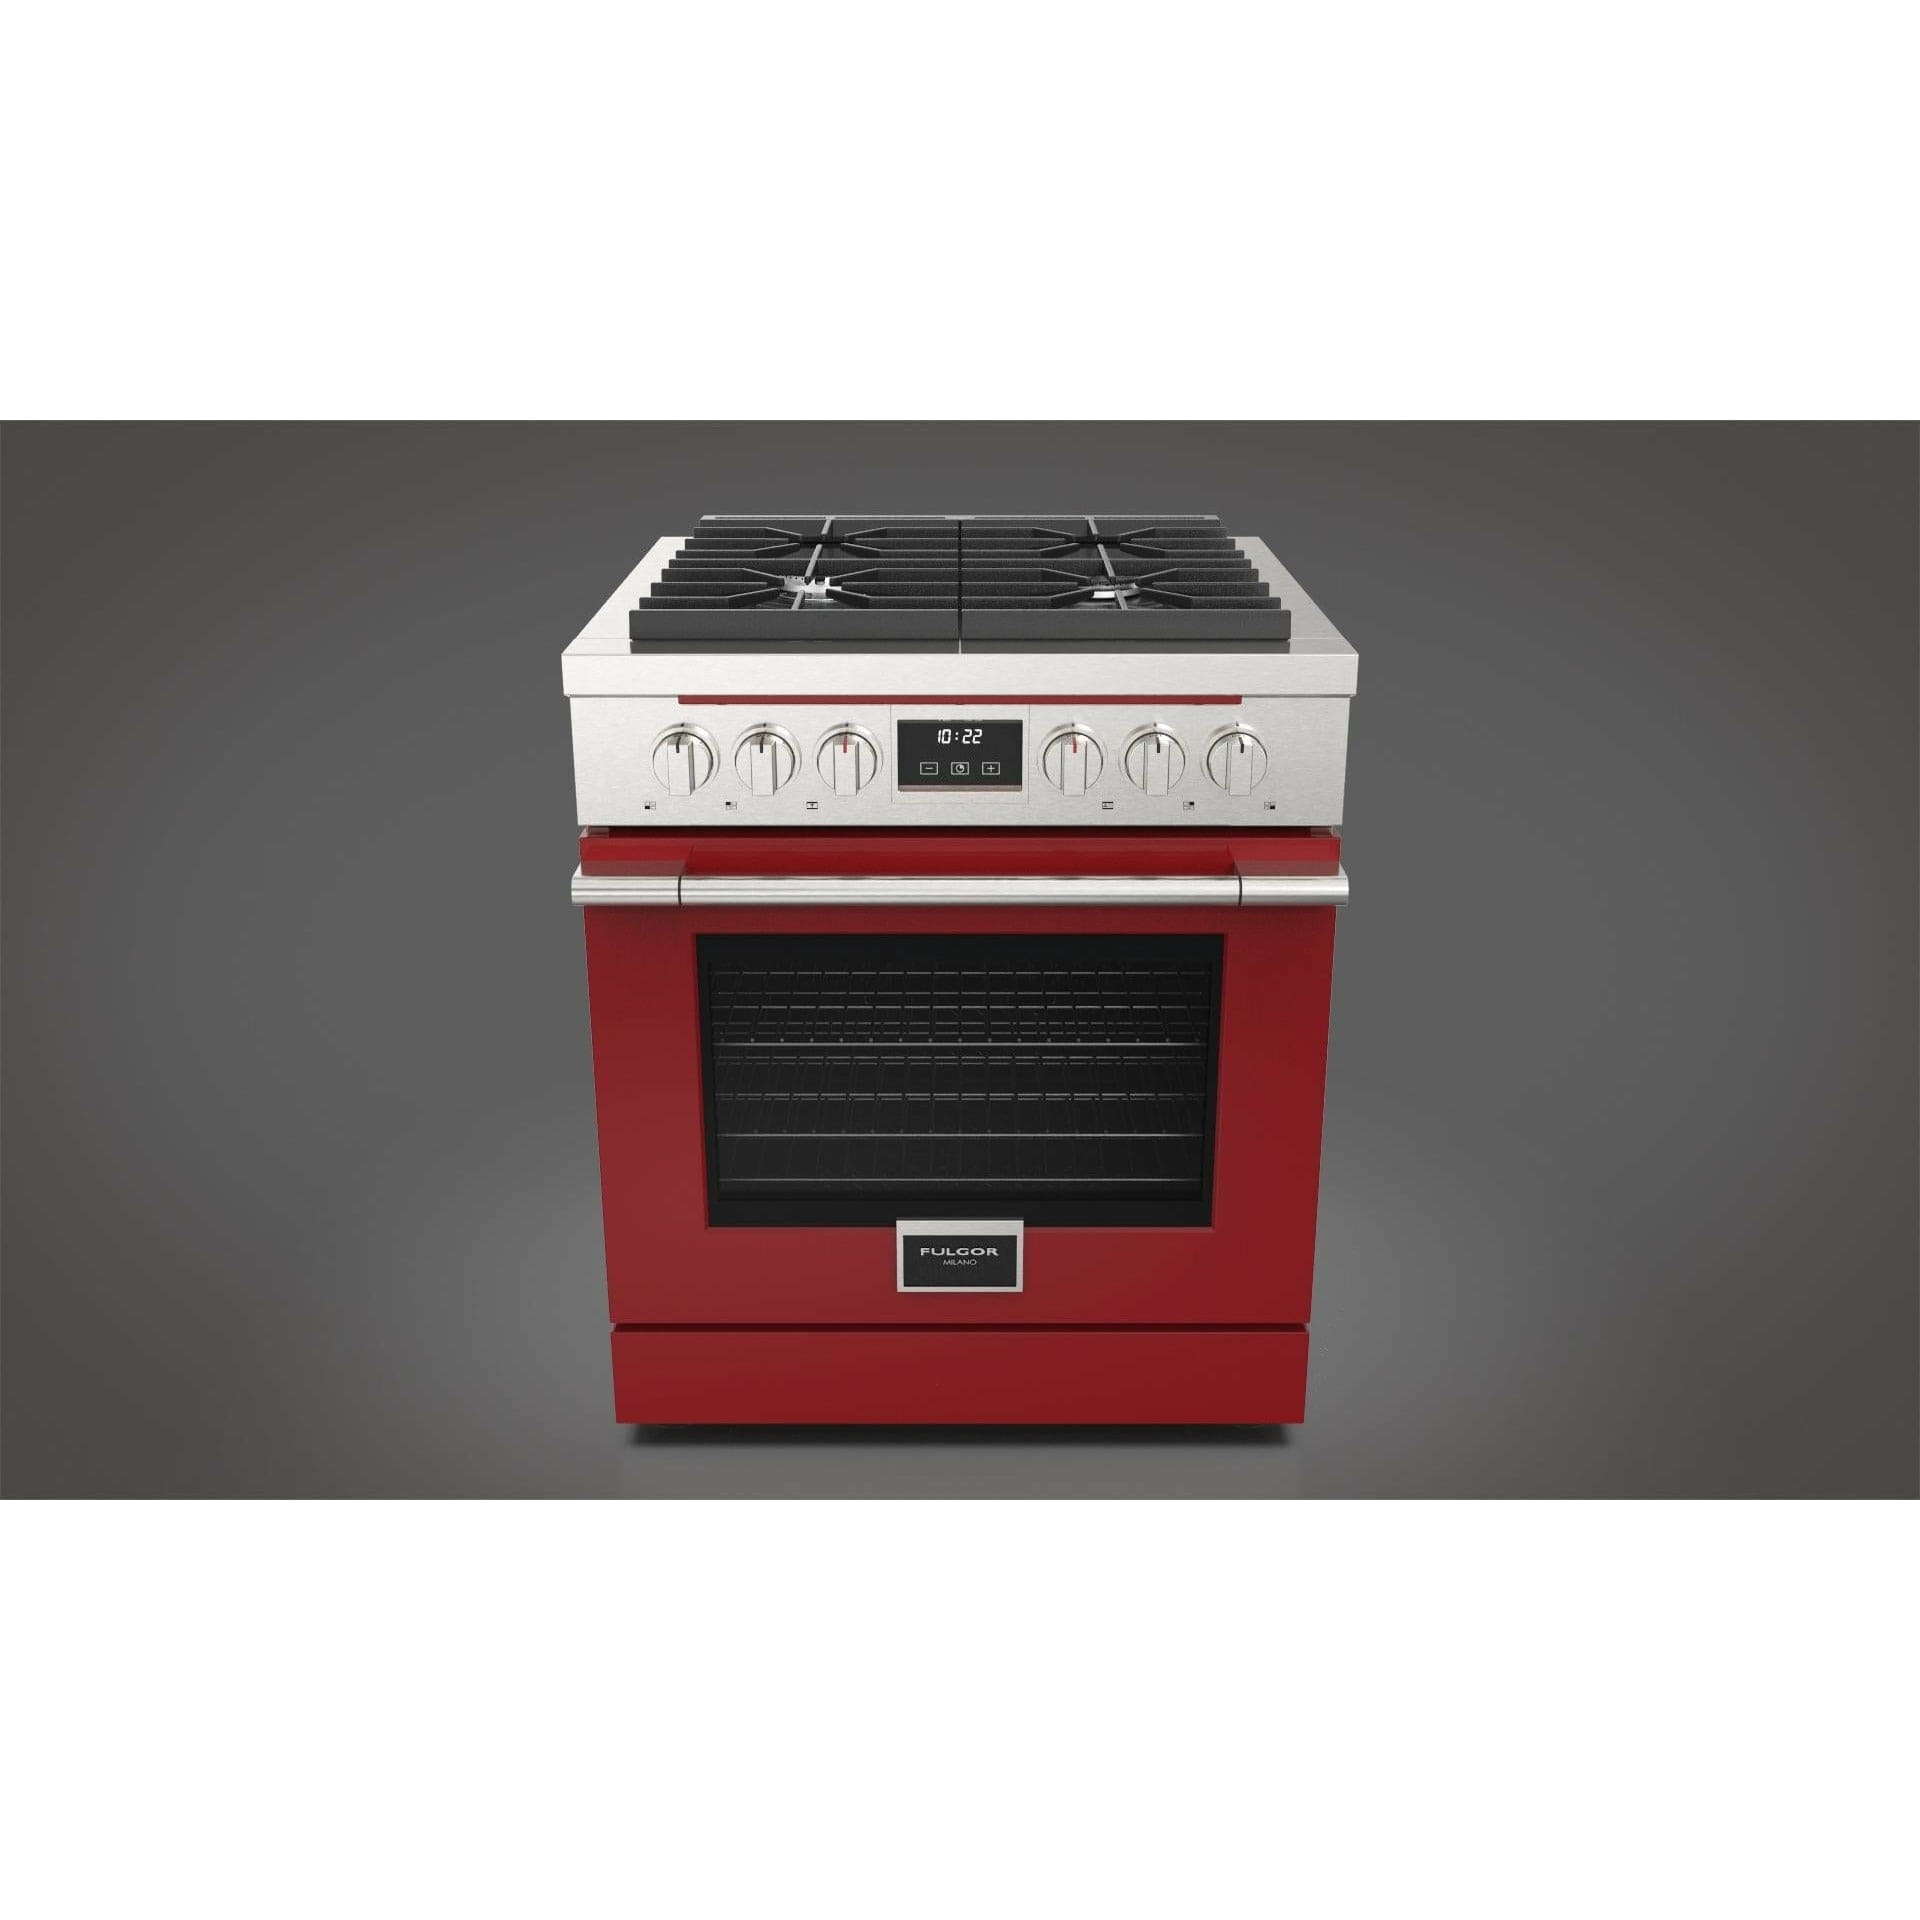 Fulgor Milano 30" Freestanding All Gas Range with 2 Duel Flame Burners, Stainless Steel - F4PGR304S2 Ranges ACDKIT30RD Luxury Appliances Direct